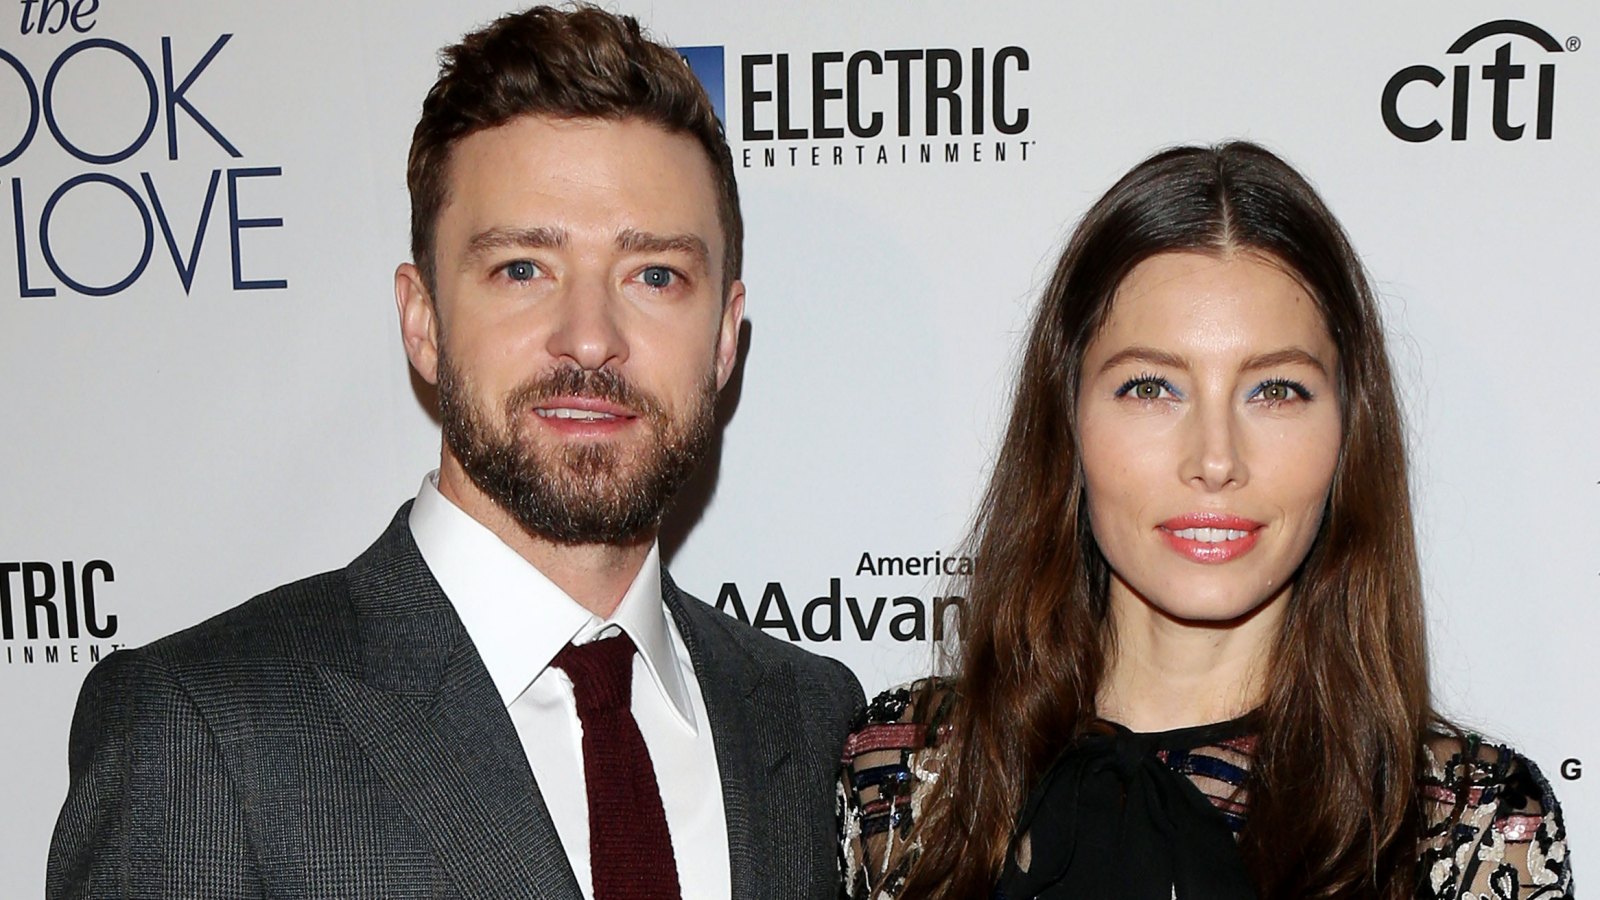 Justin Timberlake and Jessica Biel Enjoy Staycation in Bel Air After Palmer Costar PDA Scandal